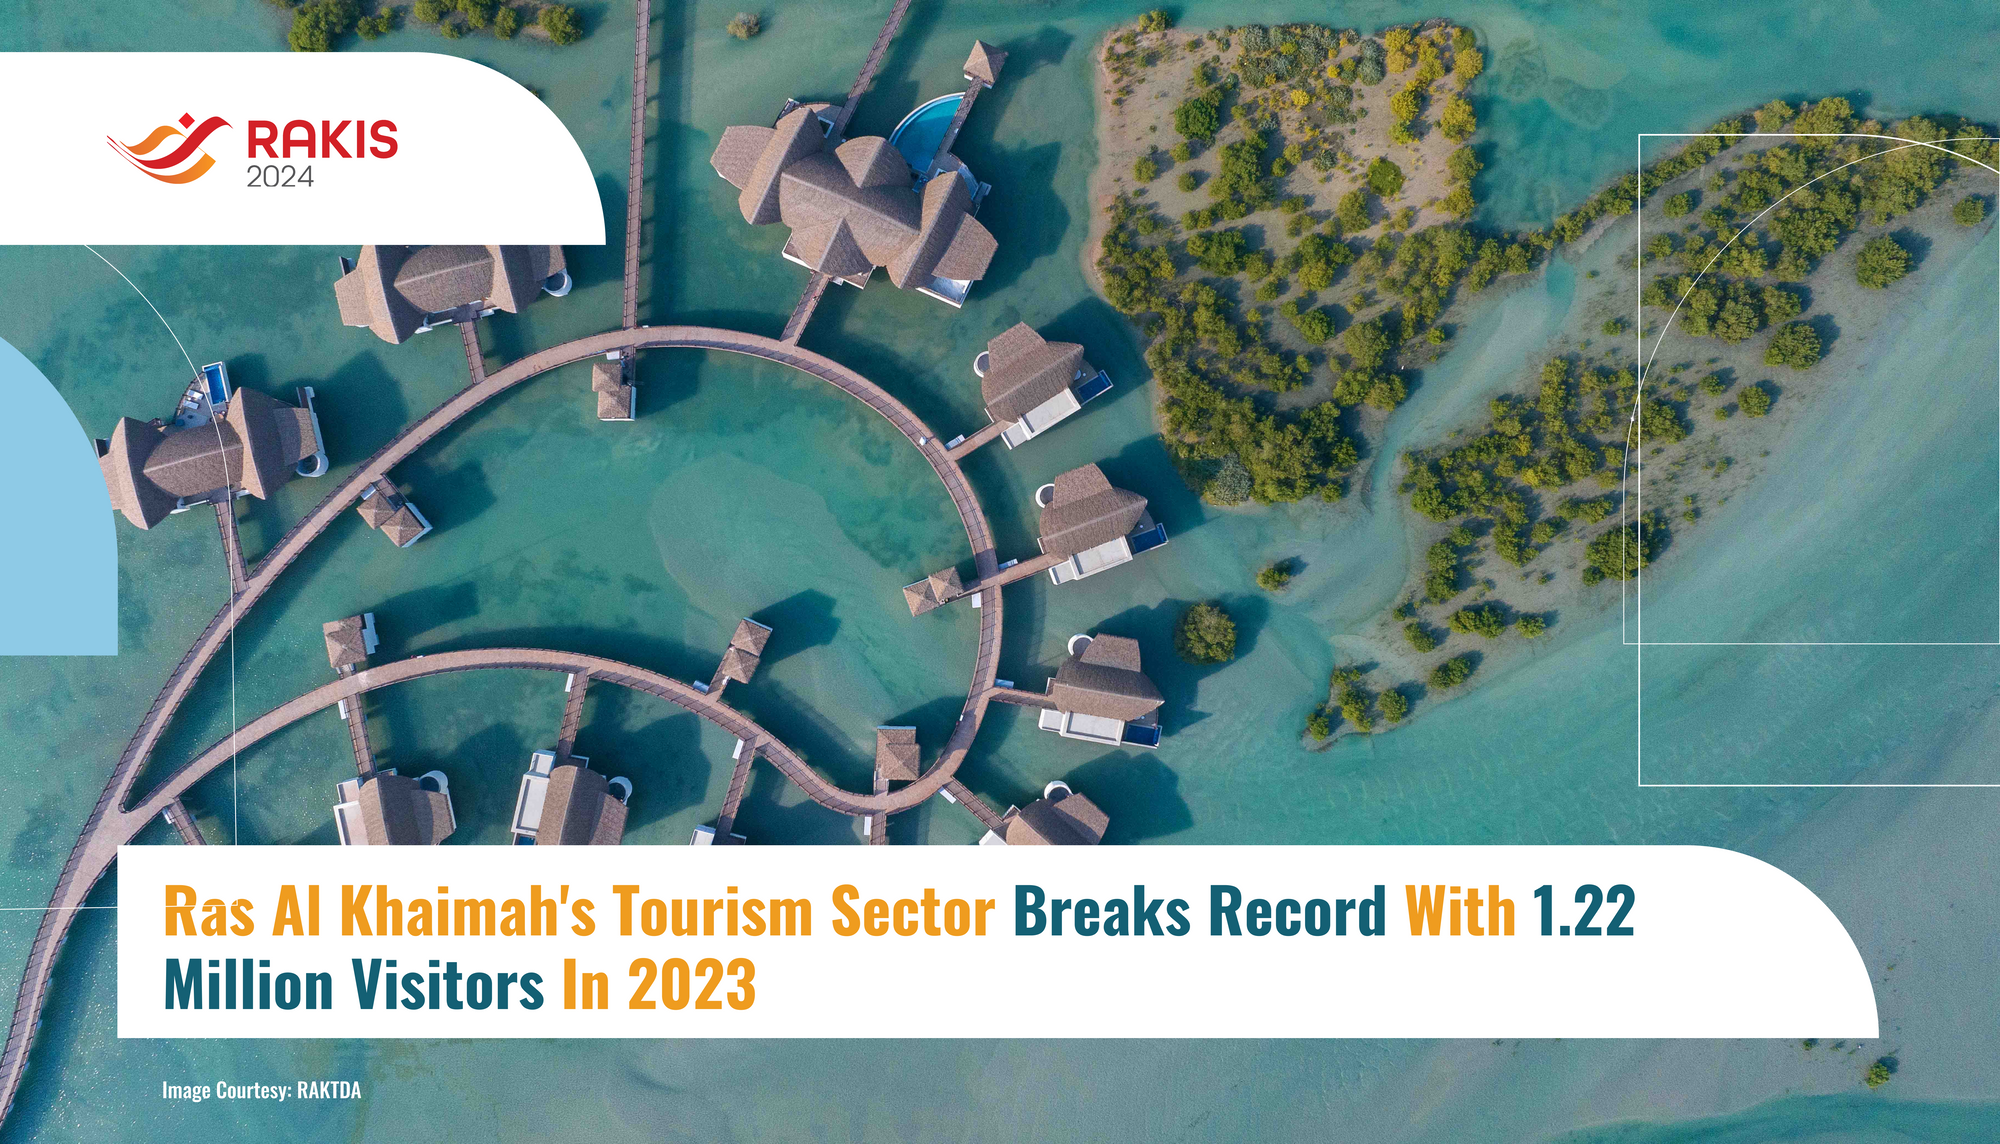 Ras Al Khaimah's Tourism Sector Breaks Record With 1.22 Million Visitors in 2023